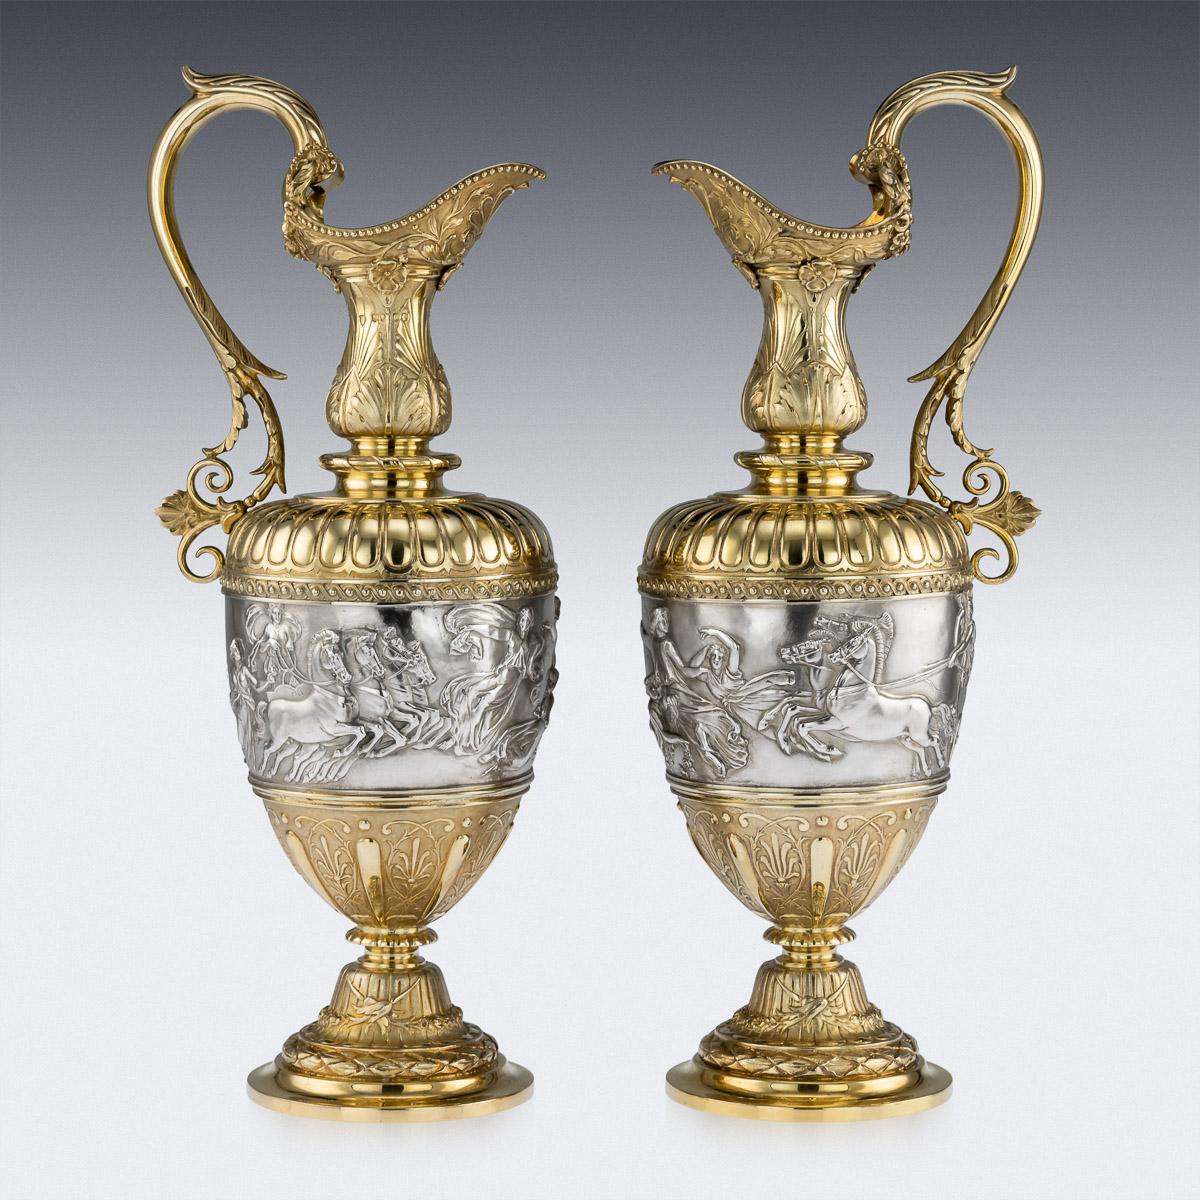 Antique 19th century Victorian magnificent pair of solid silver-gilt wine ewers. Amphora shaped, on a spreading foot chased with laurel leaf borders below fluted raised centre, the body with a large band figuring classical scenes of quadriga,